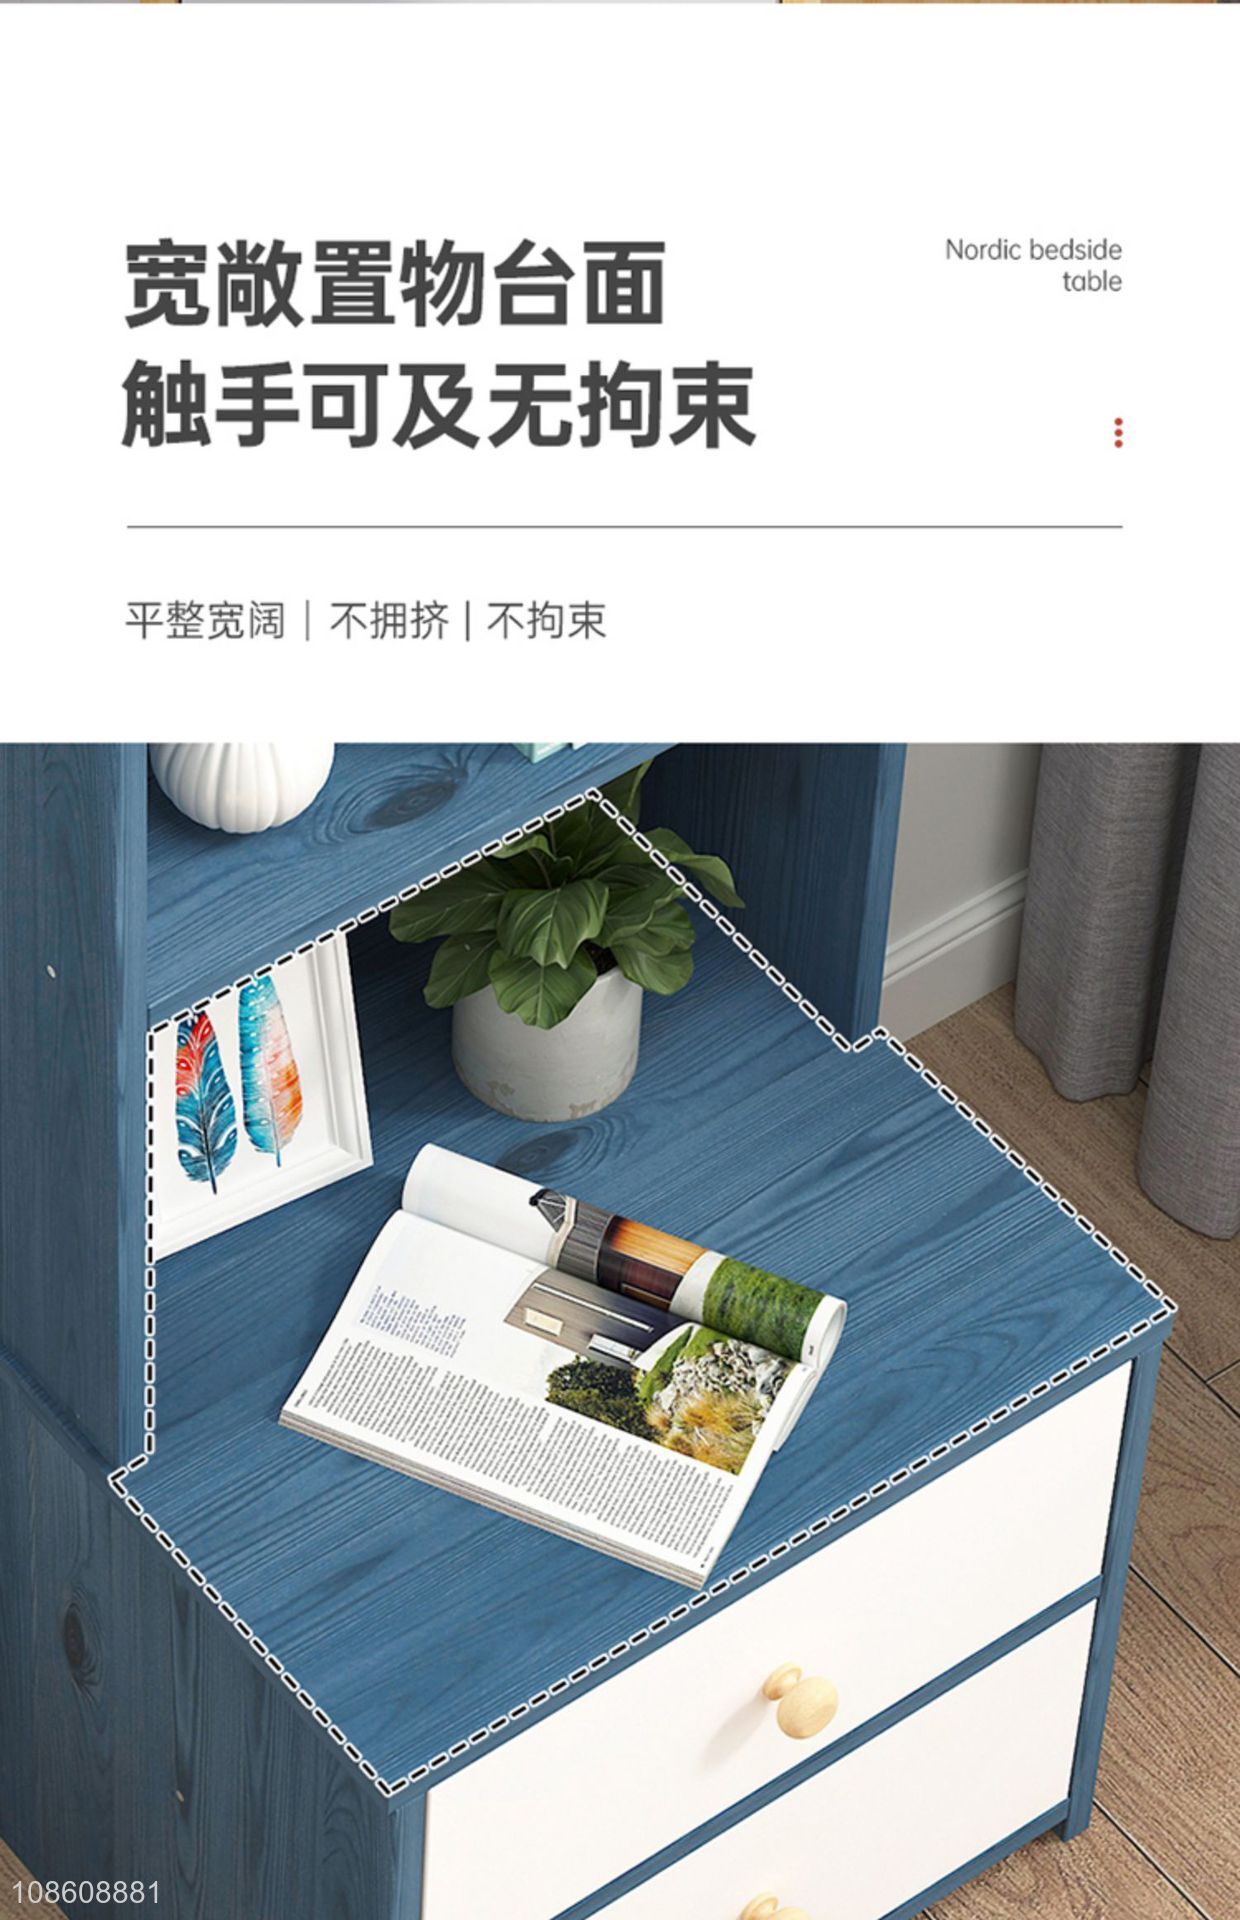 China wholesale multicolor bedside table nightstand with drawer